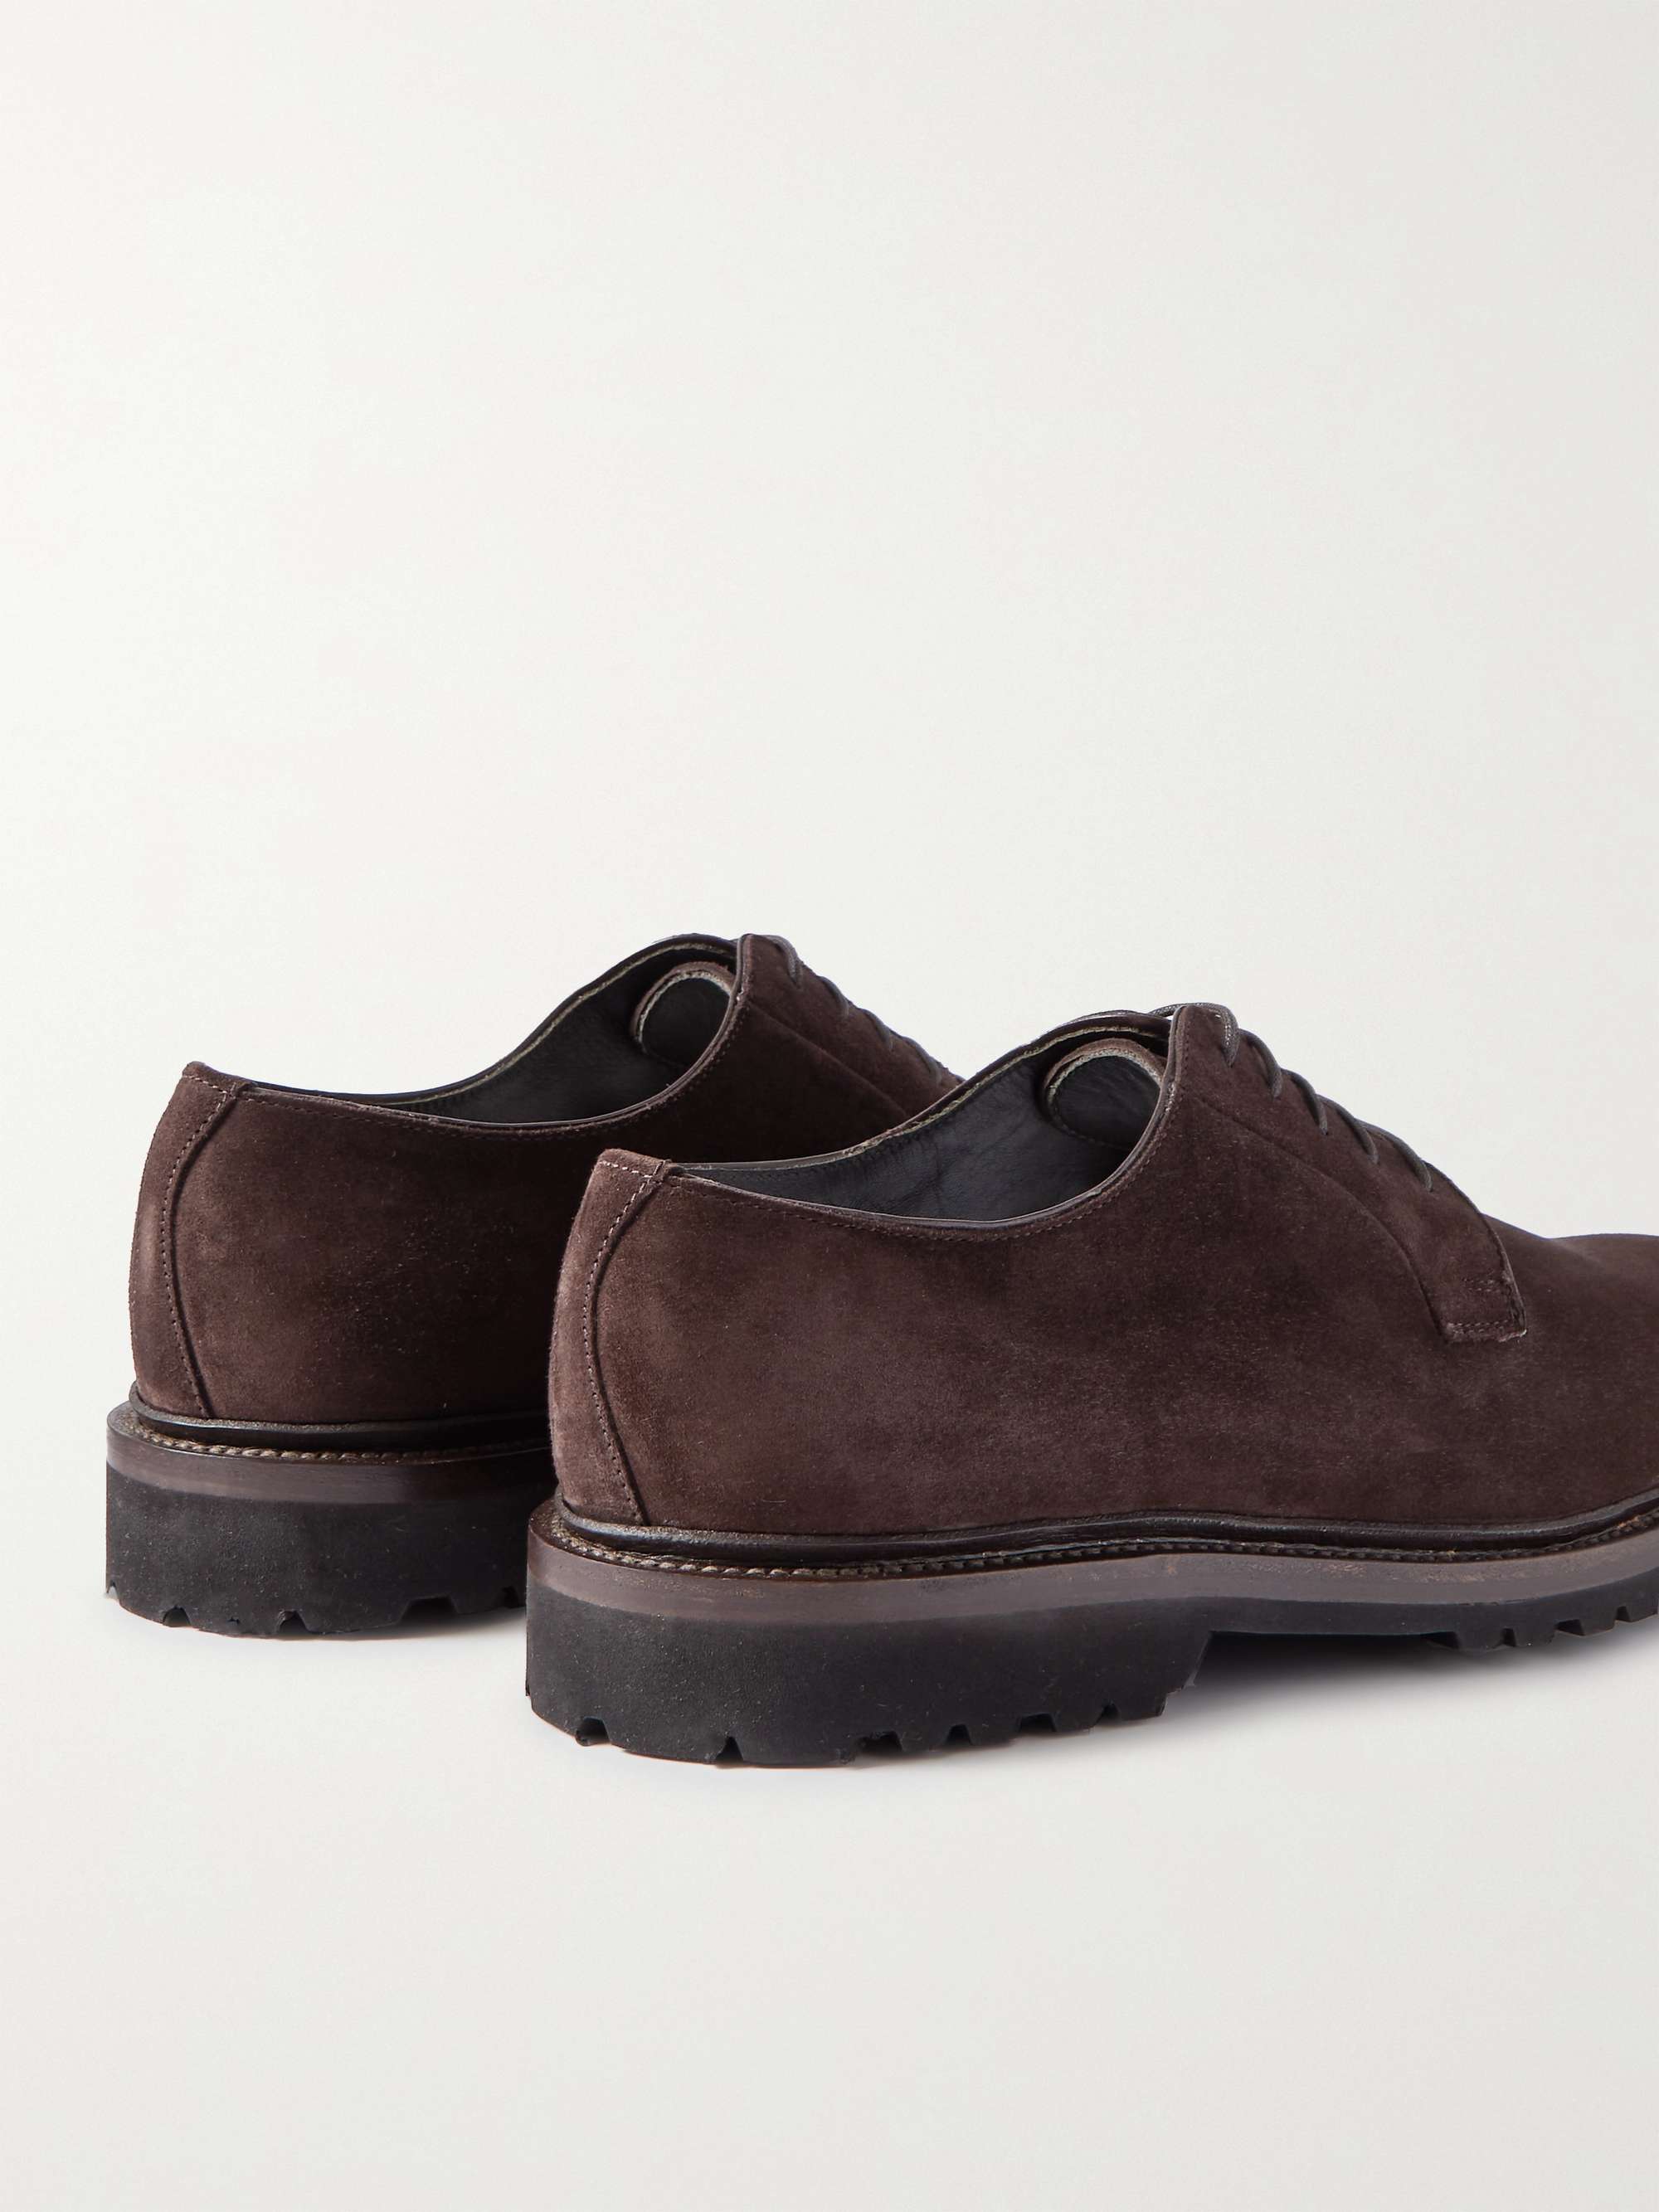 GEORGE CLEVERLEY Archie Suede Derby Shoes